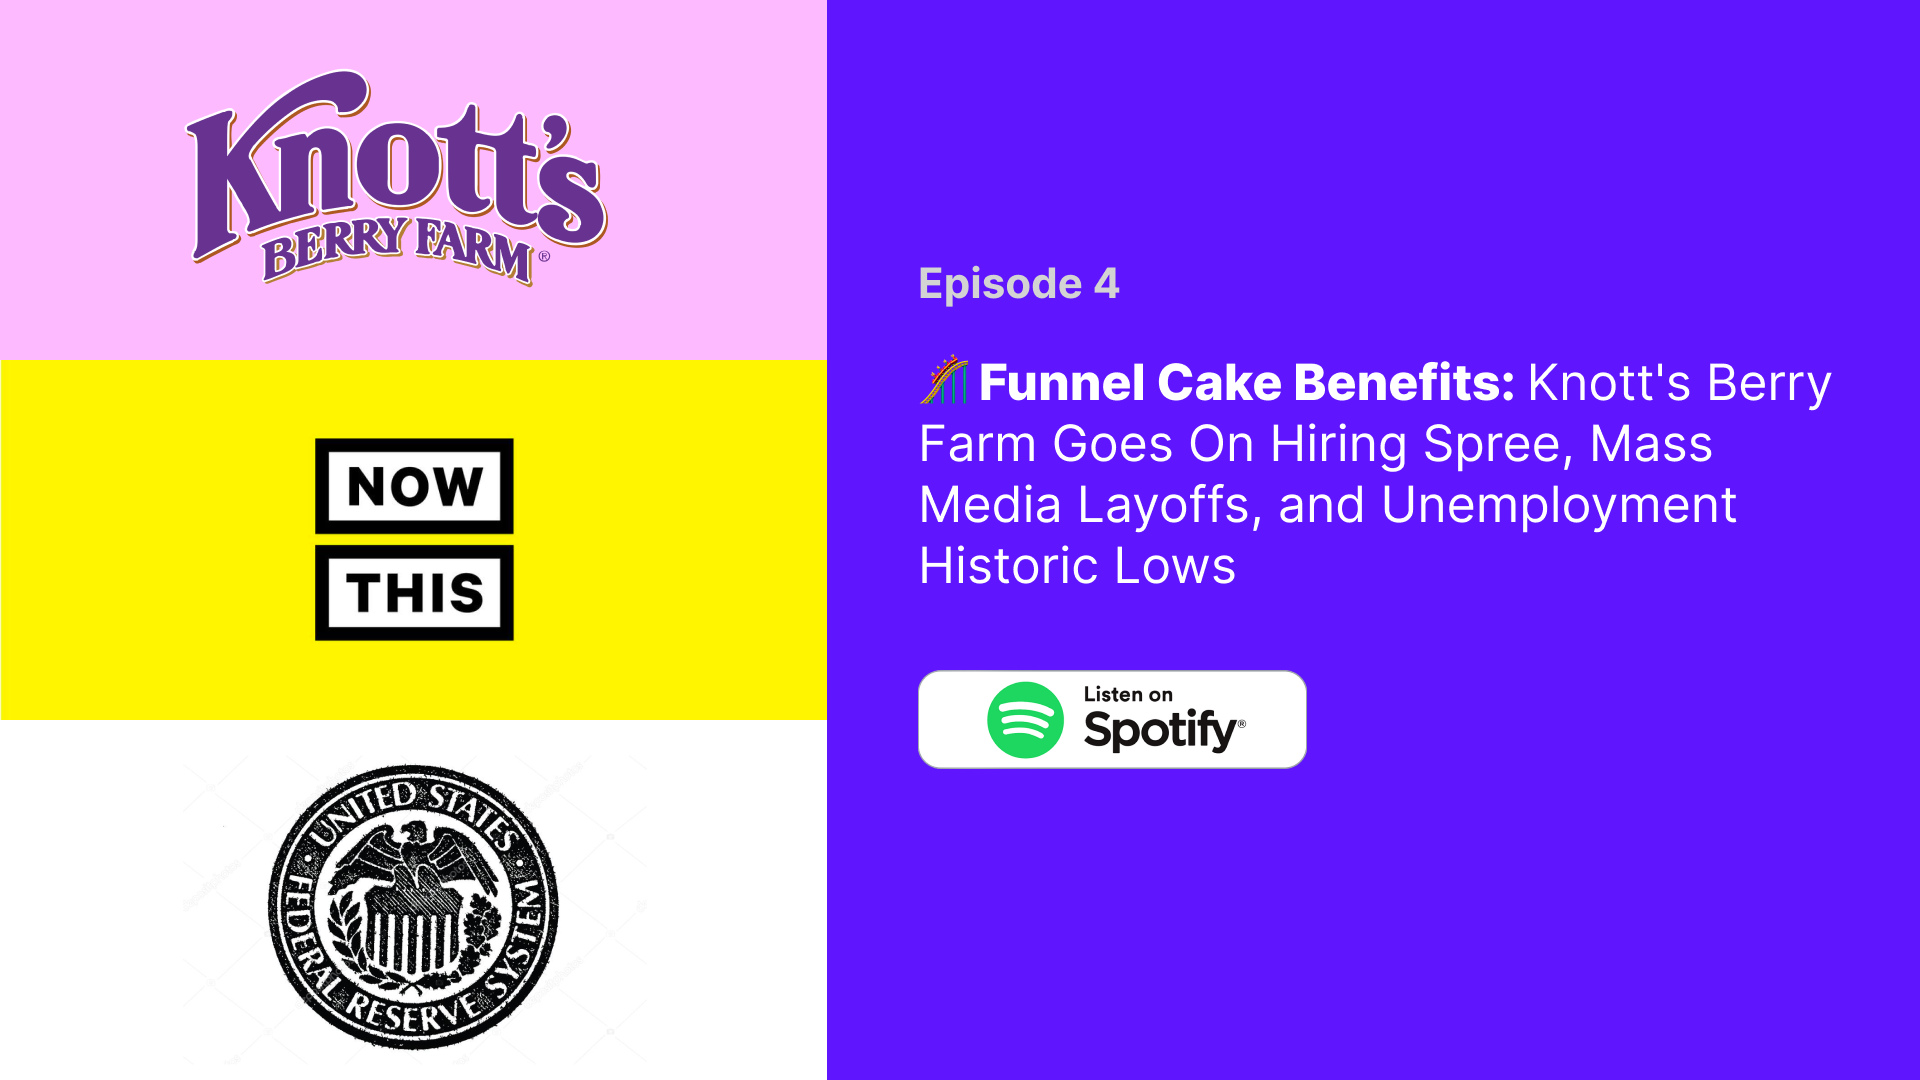 🎢 Funnel Cake Benefits: Knott's Berry Farm Goes On Hiring Spree, Mass Media Layoffs, and Unemployment Historic Lows